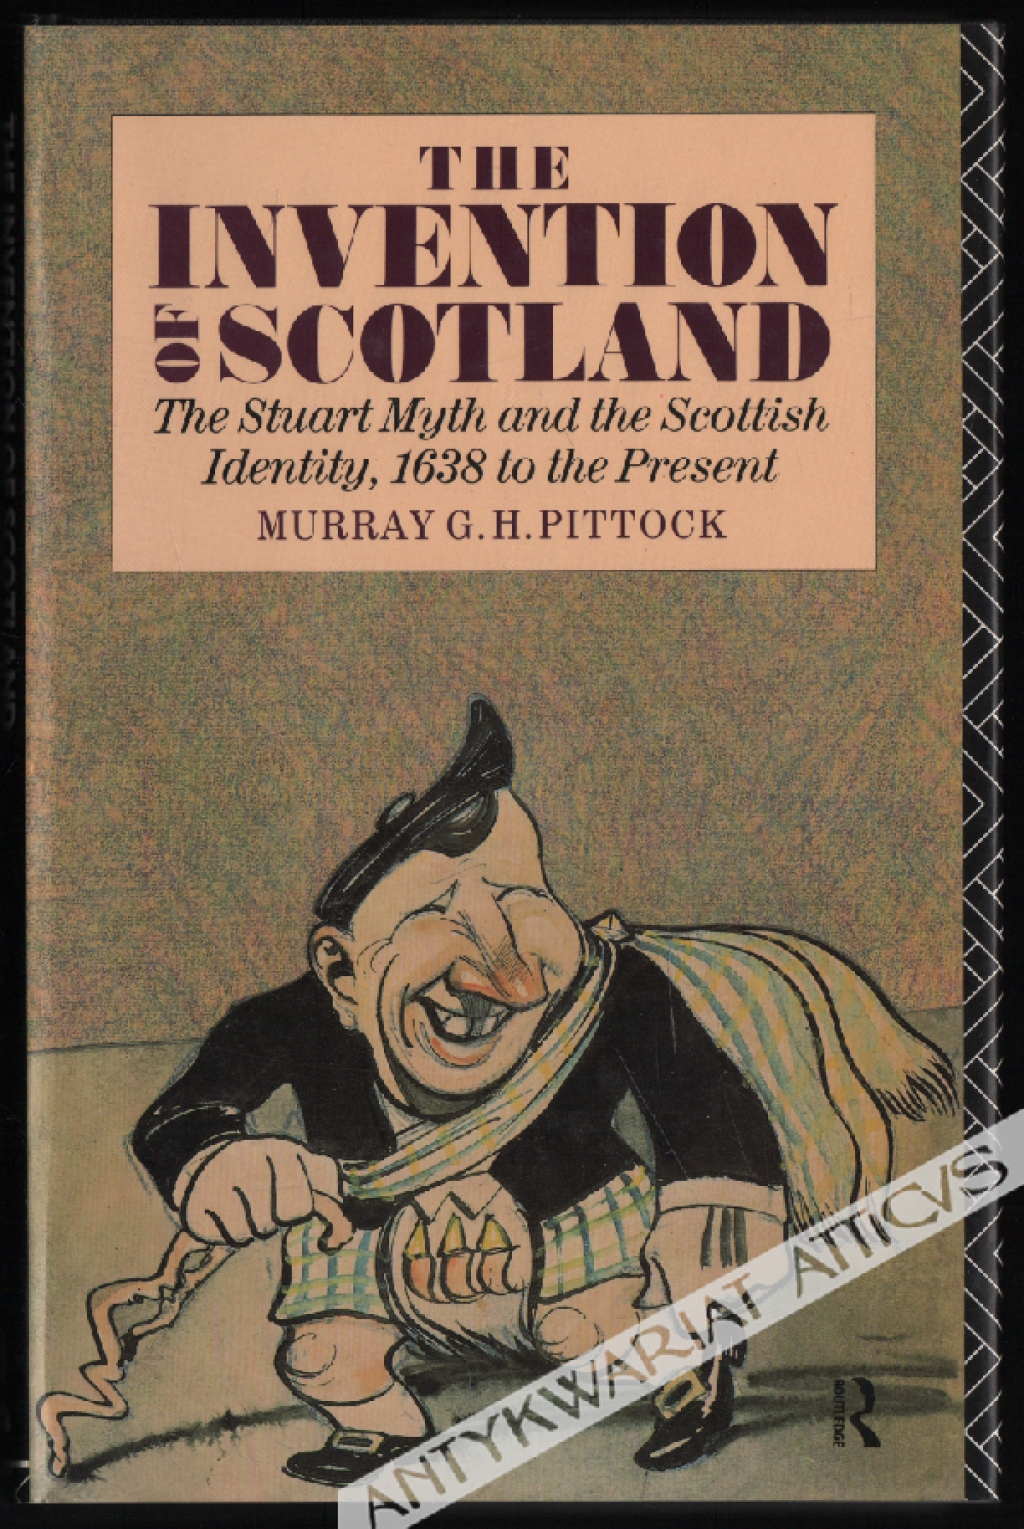 The Invention of Scotland: The Stuart Myth and the Scotish Identity, 1638 to the Present